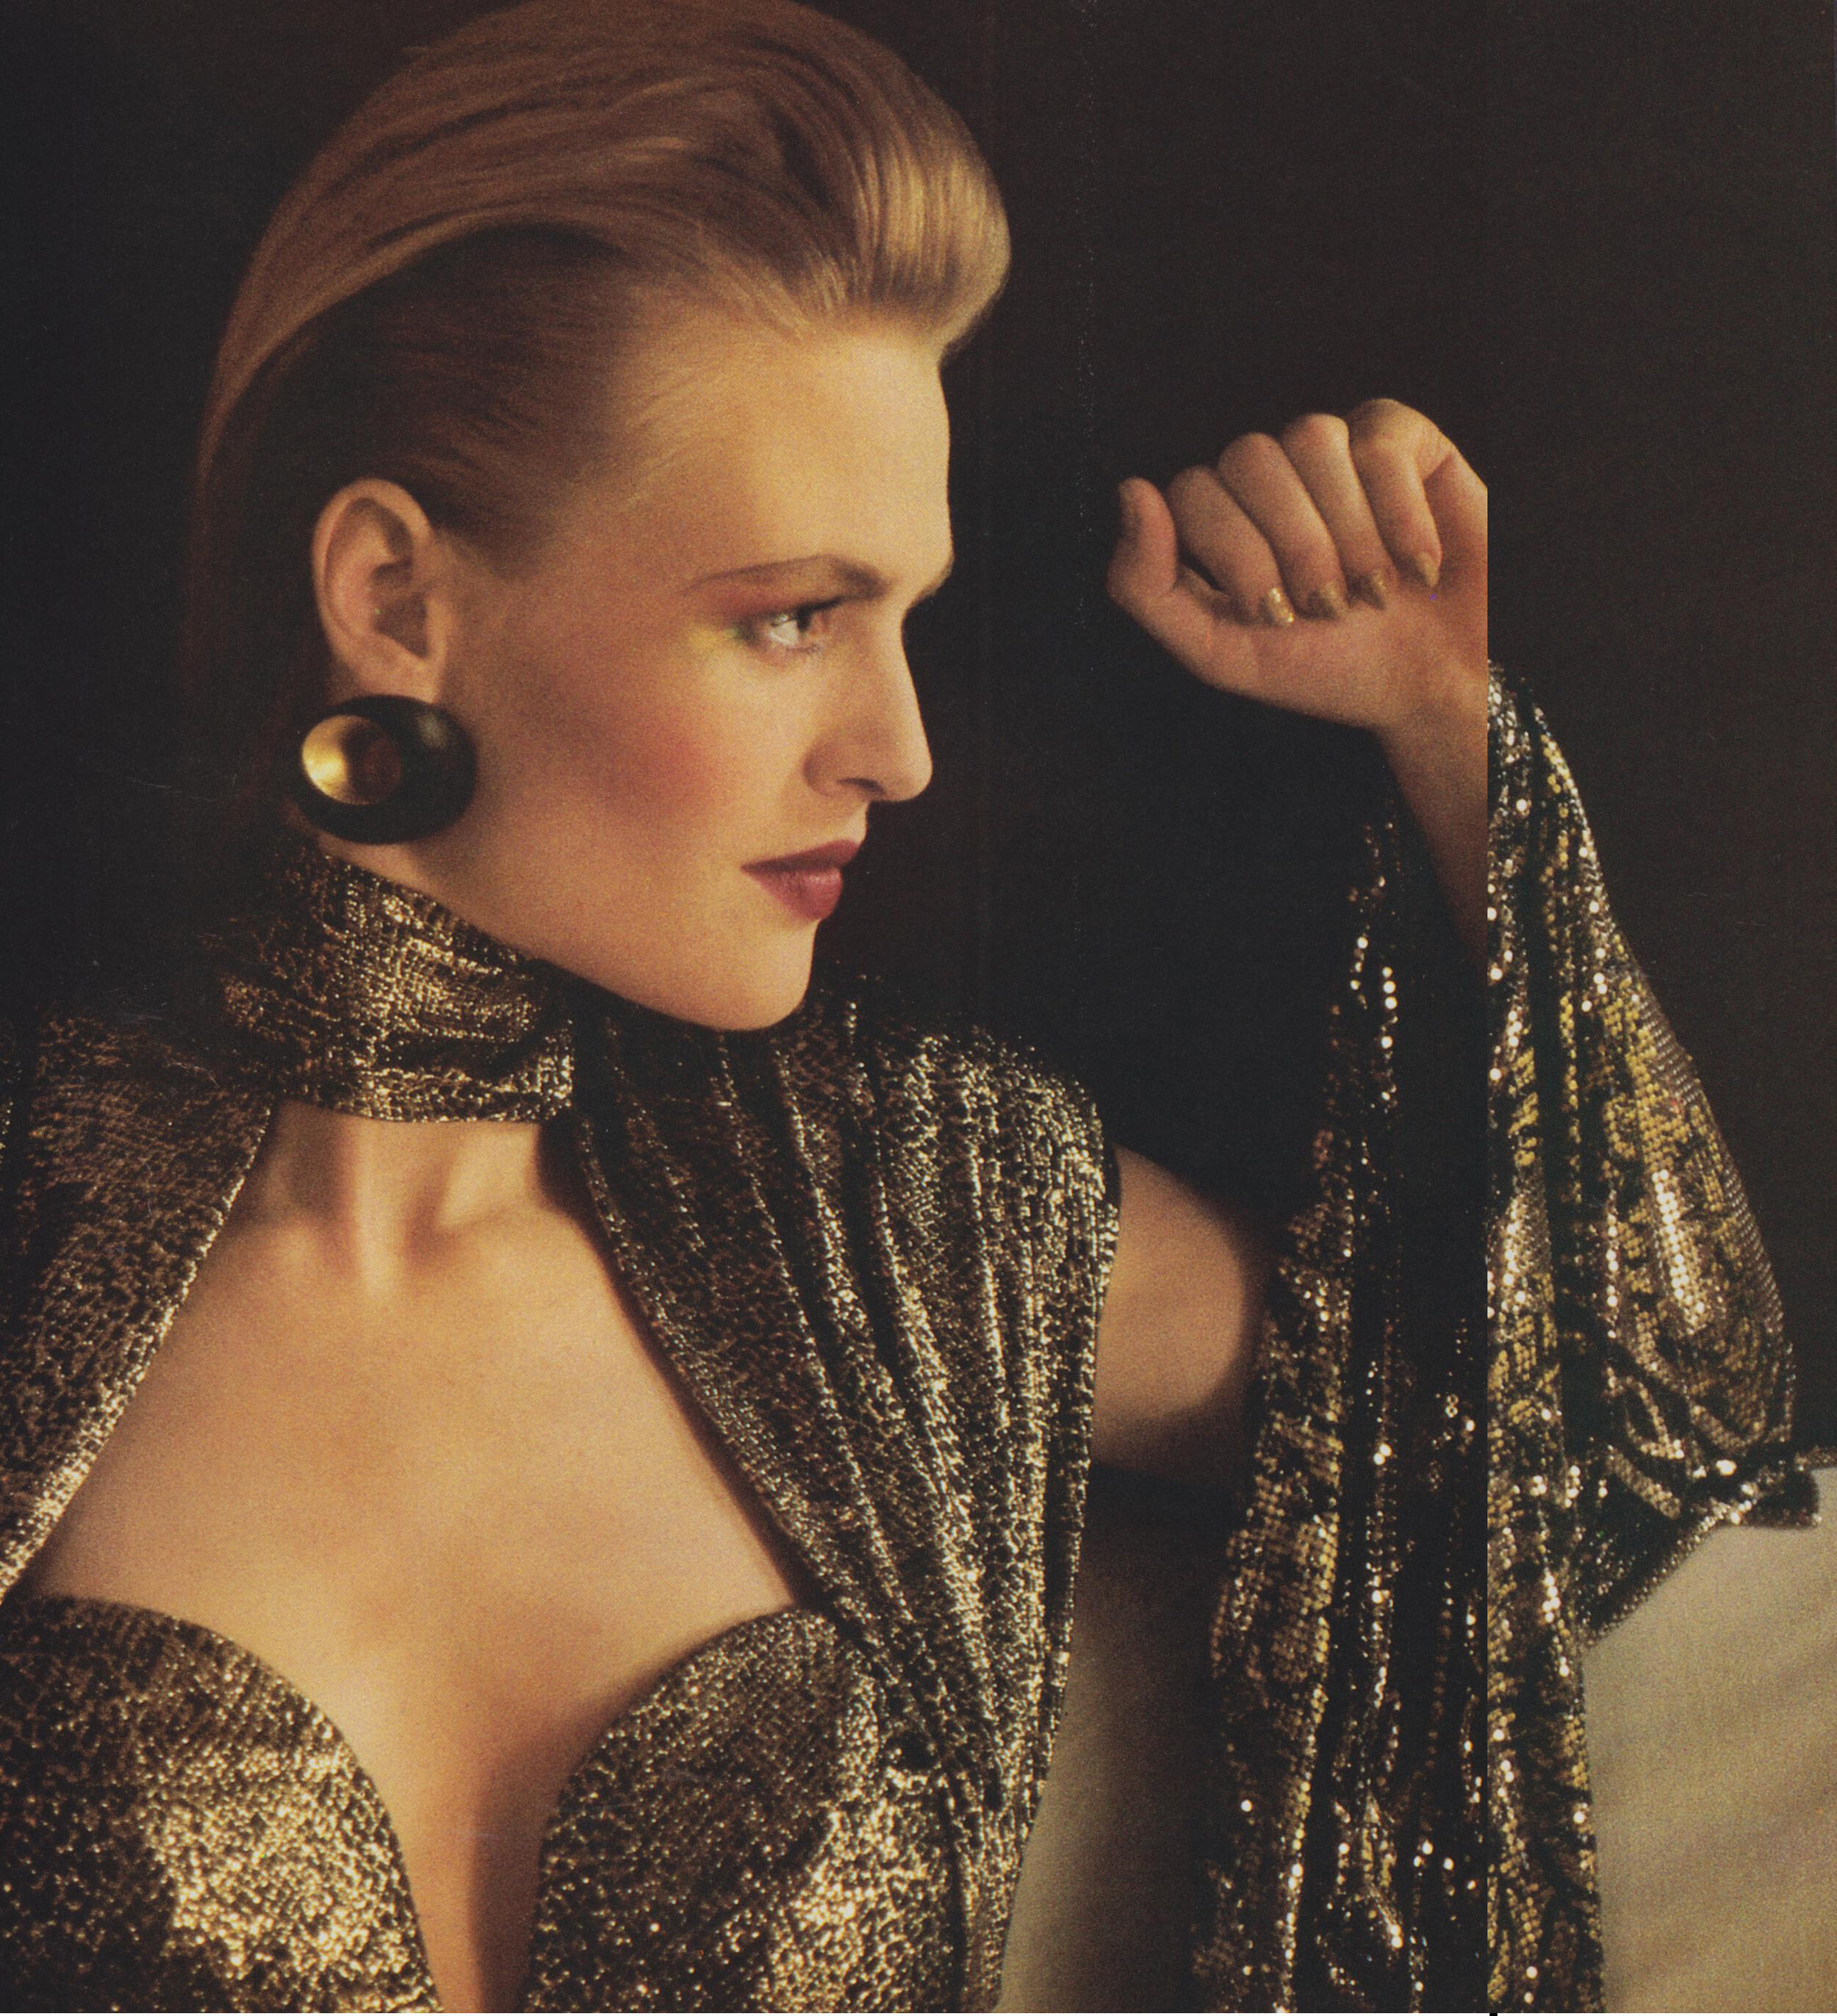 Serpent-print gold lamé photographed by Sheila Metzner for Vogue, September 1985.